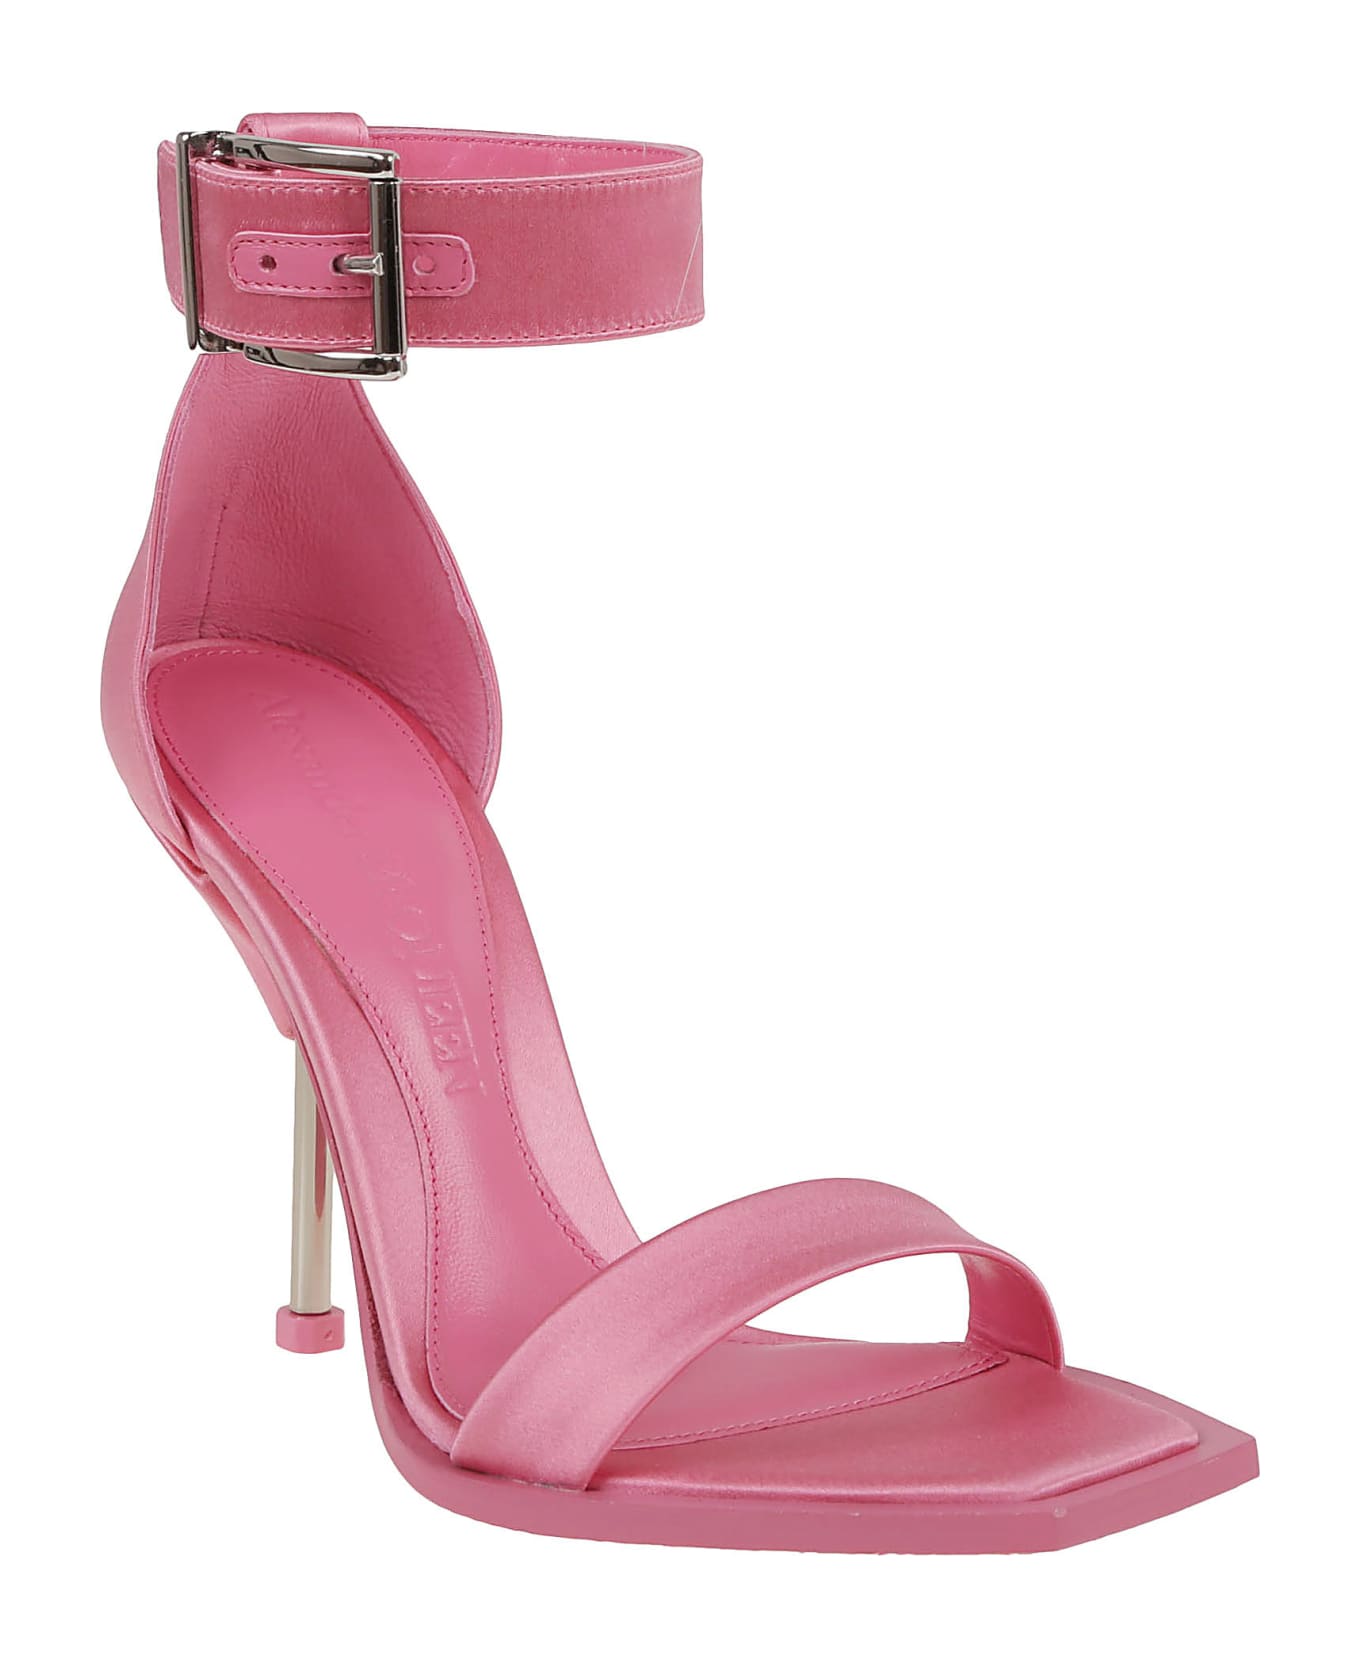 Alexander McQueen Ankle Strap Sandals - sneakers mujer naranjas talla 19 entre 60€ y 90